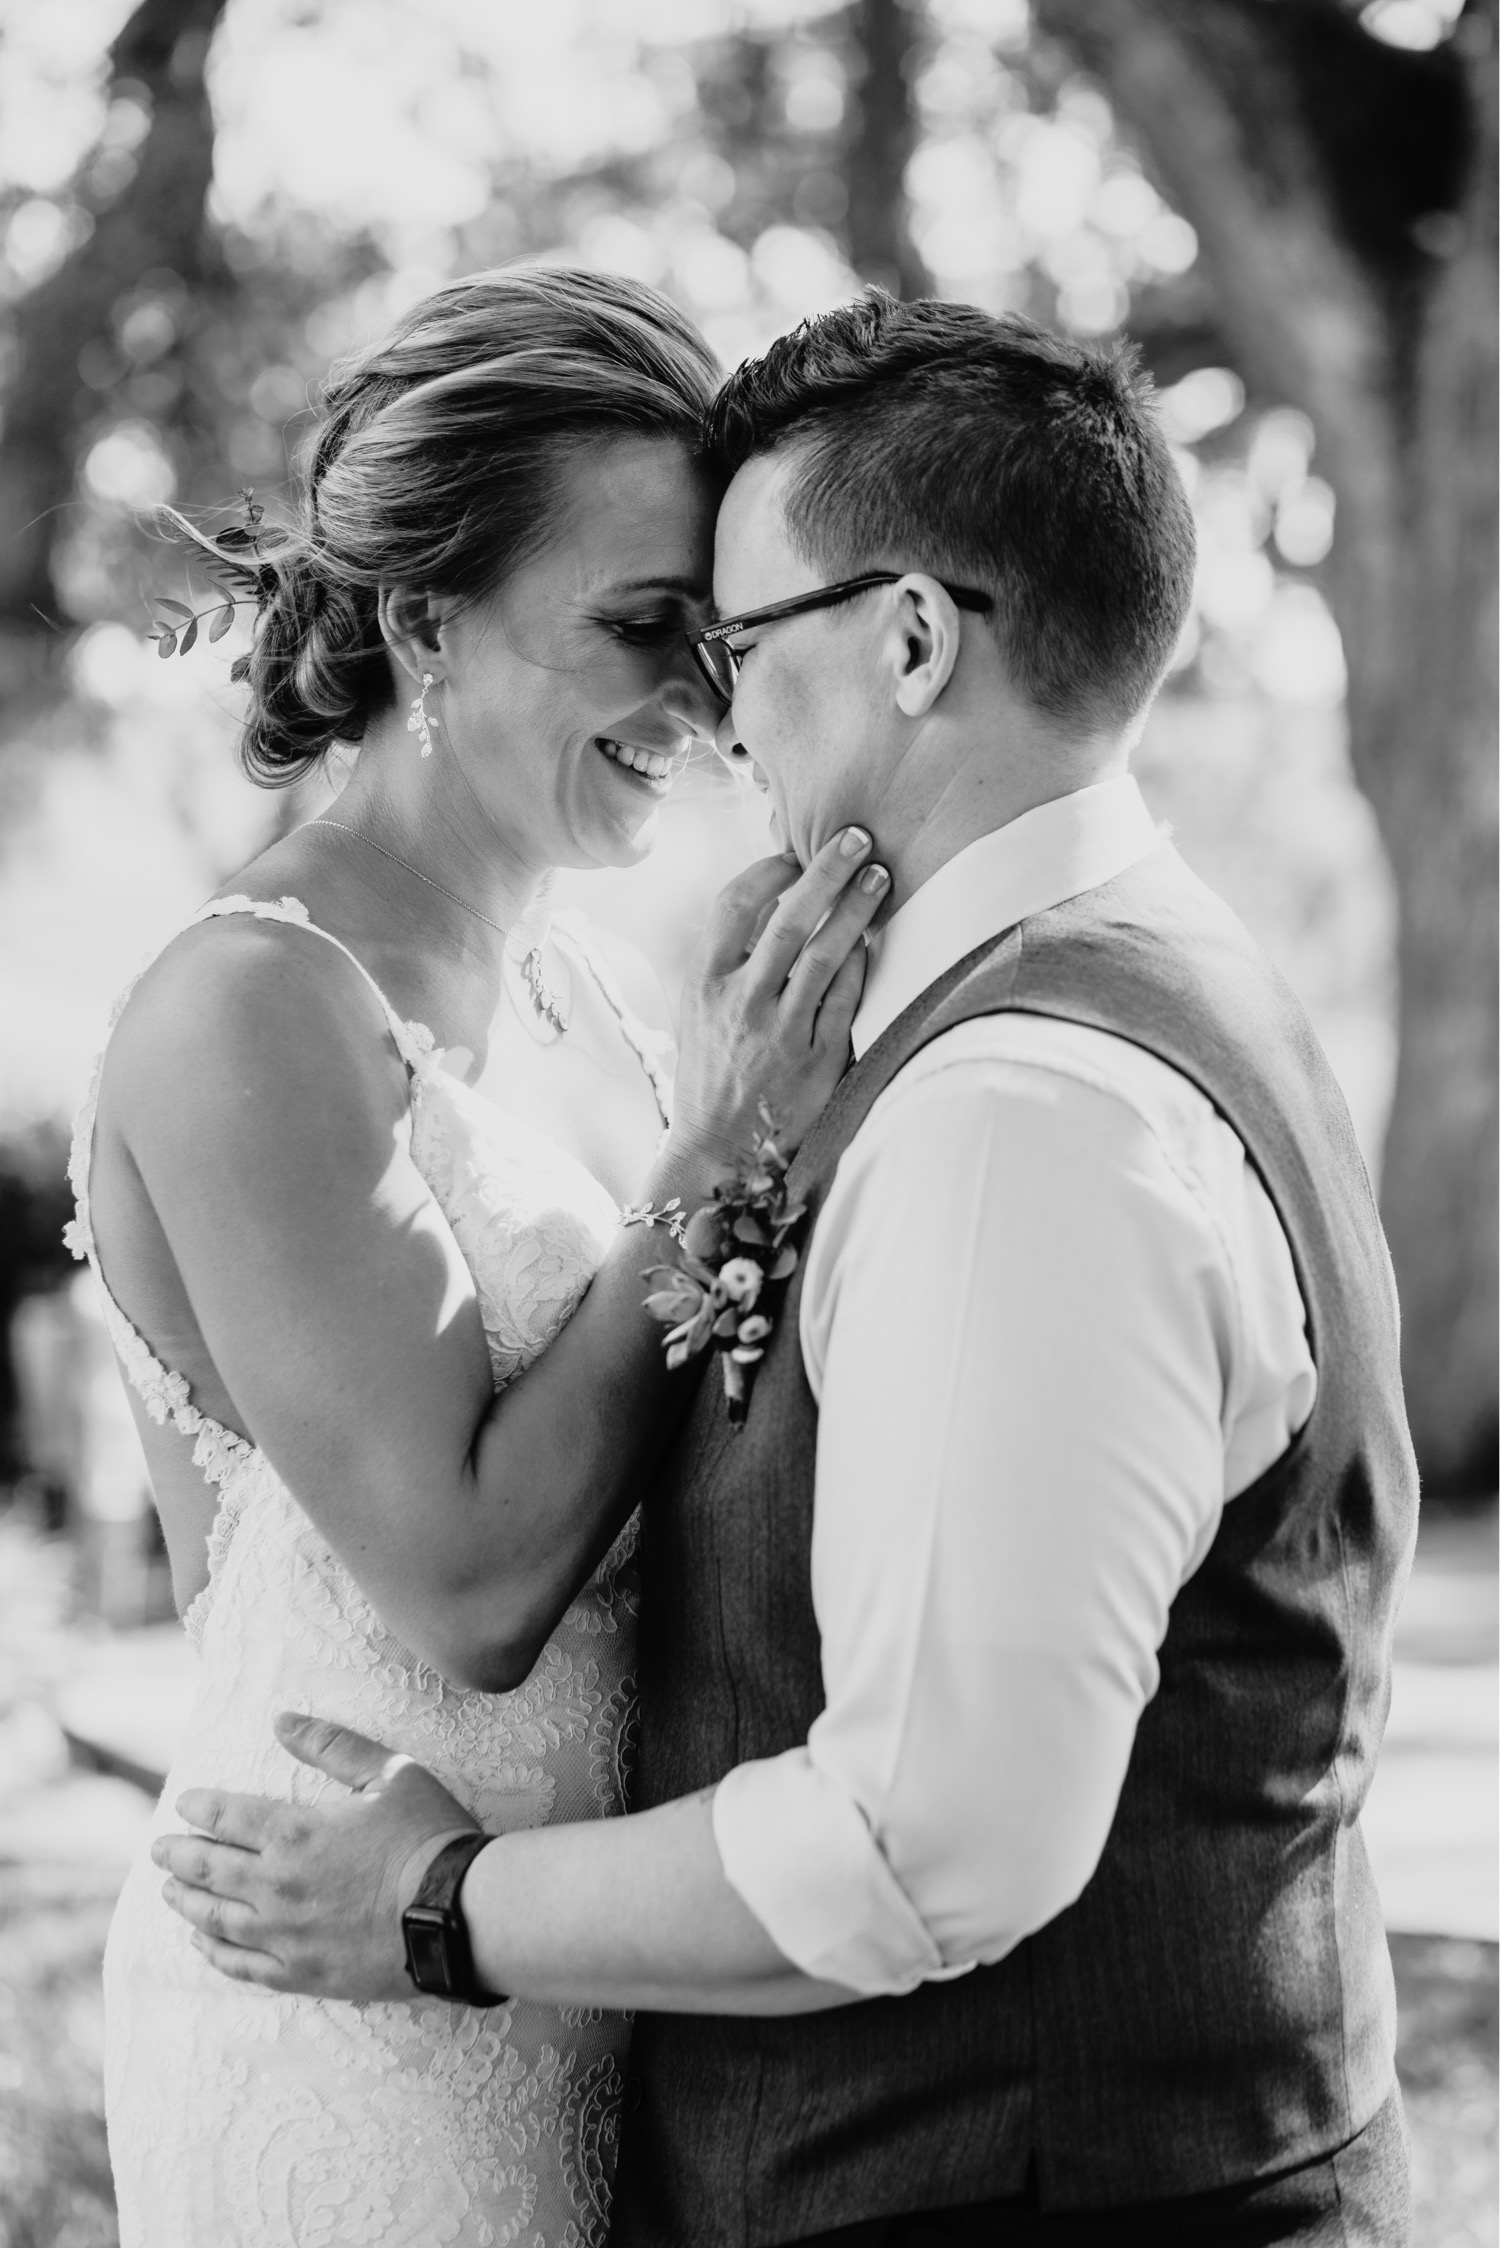 Brides touch each others foreheads in an embrace. Liz Koston Photography.